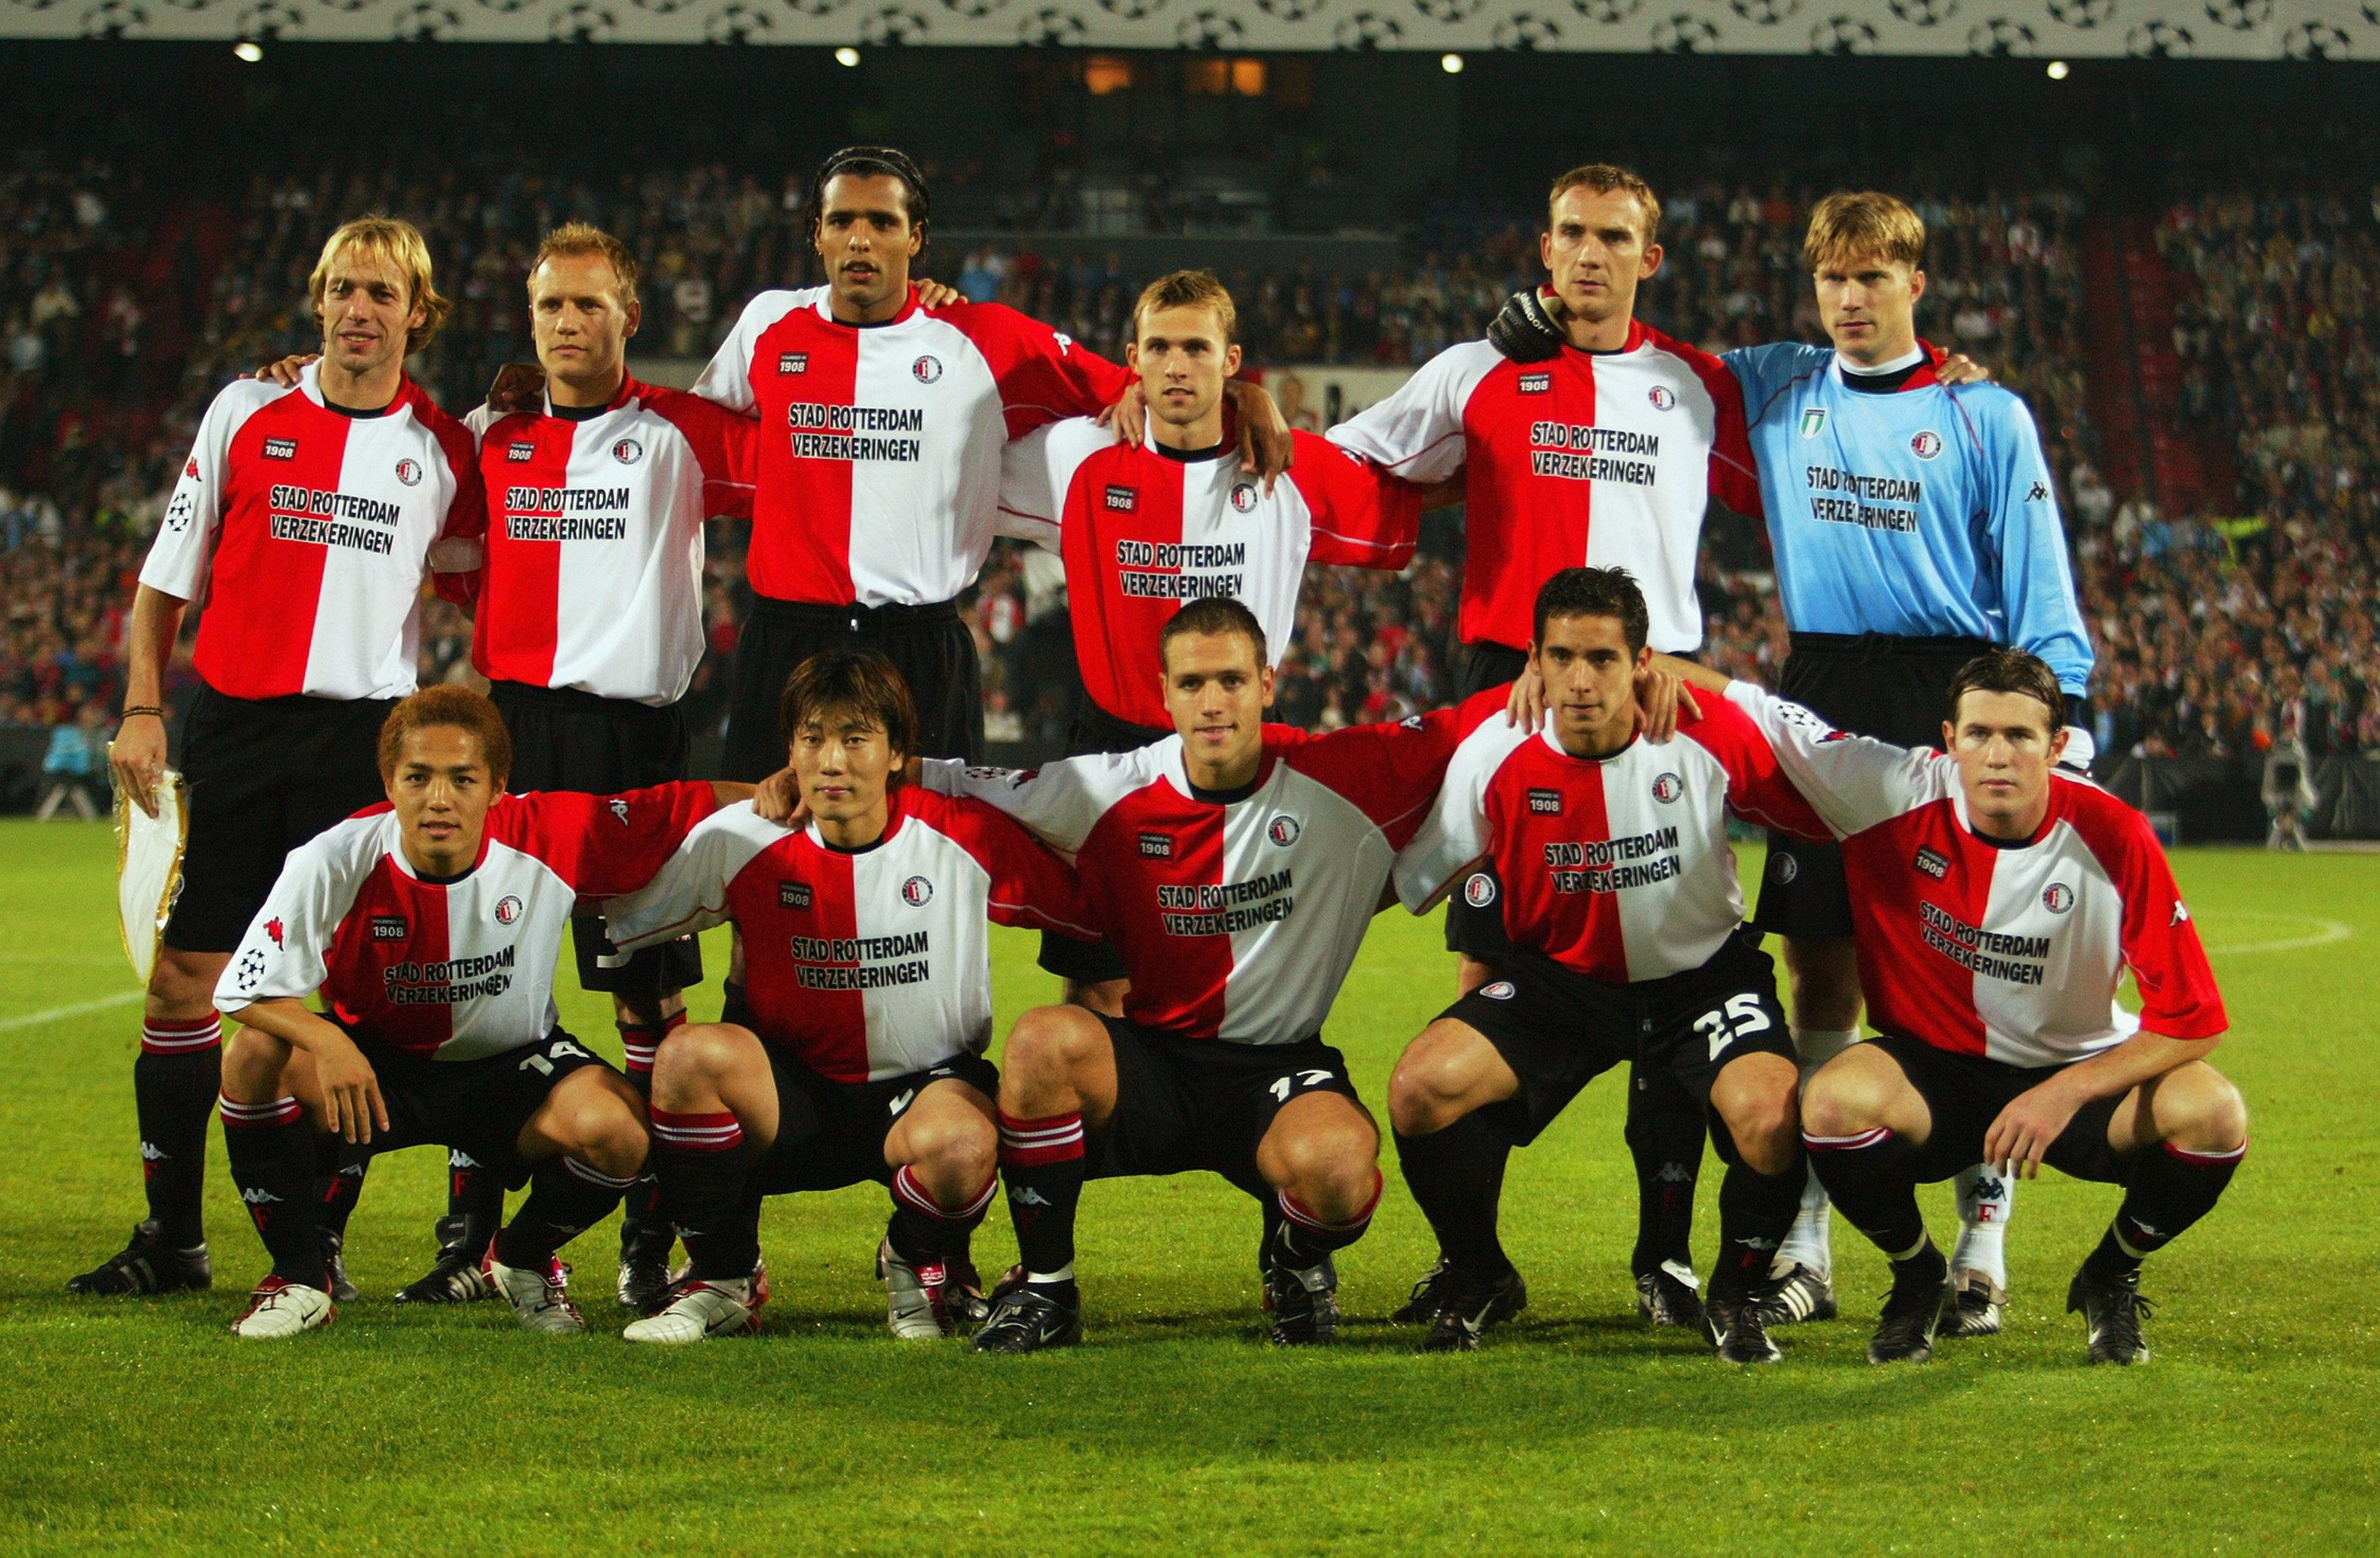 UEFA Champions League on Twitter: "Feyenoord line-up in 2002/03 group stage. 💪 #UCL https://t.co/5w8XaynUrt" Twitter